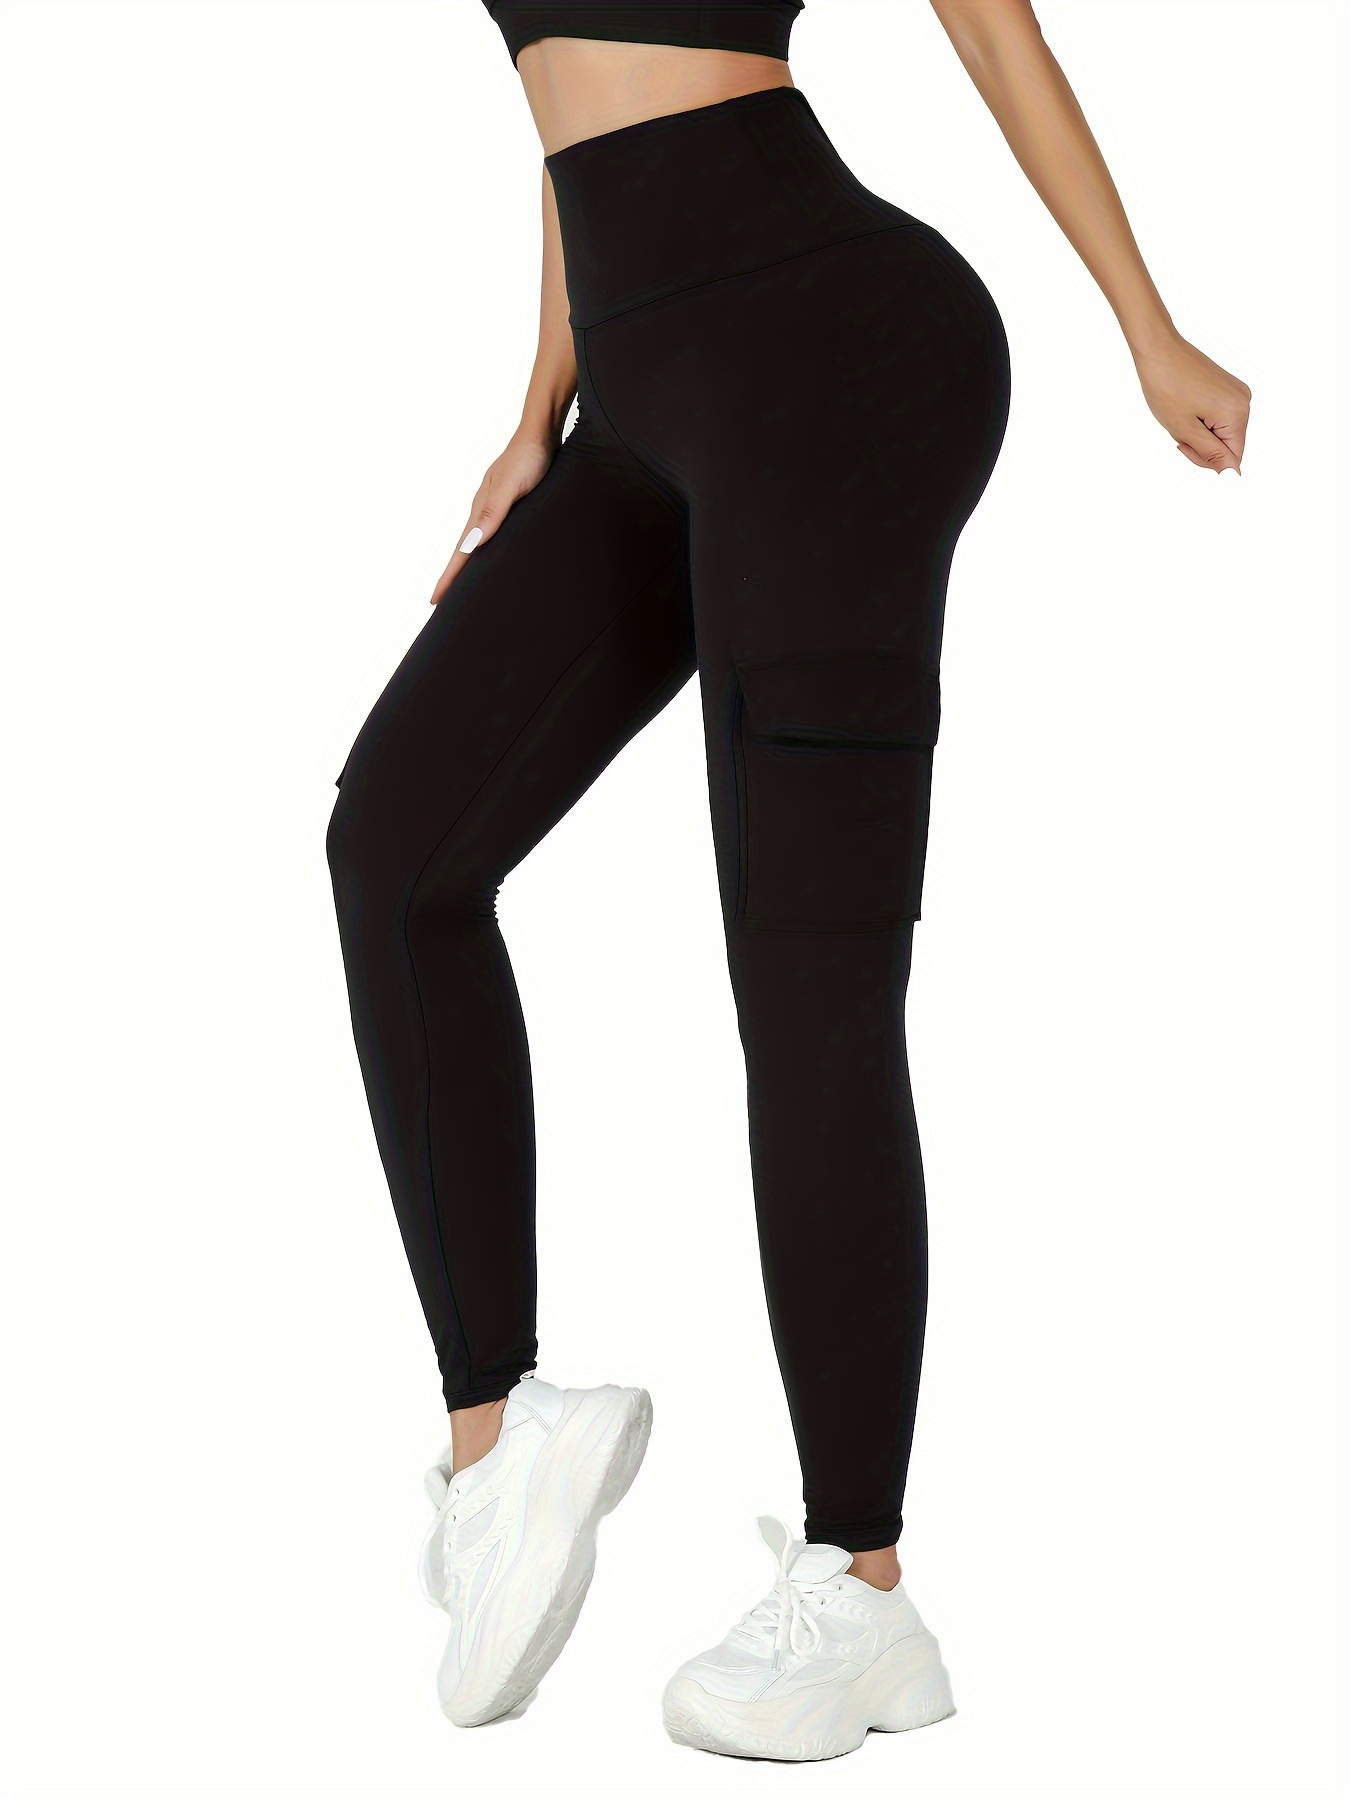 Leggings With Pockets For Women, High Waist Tummy Control Workout Yoga Pants